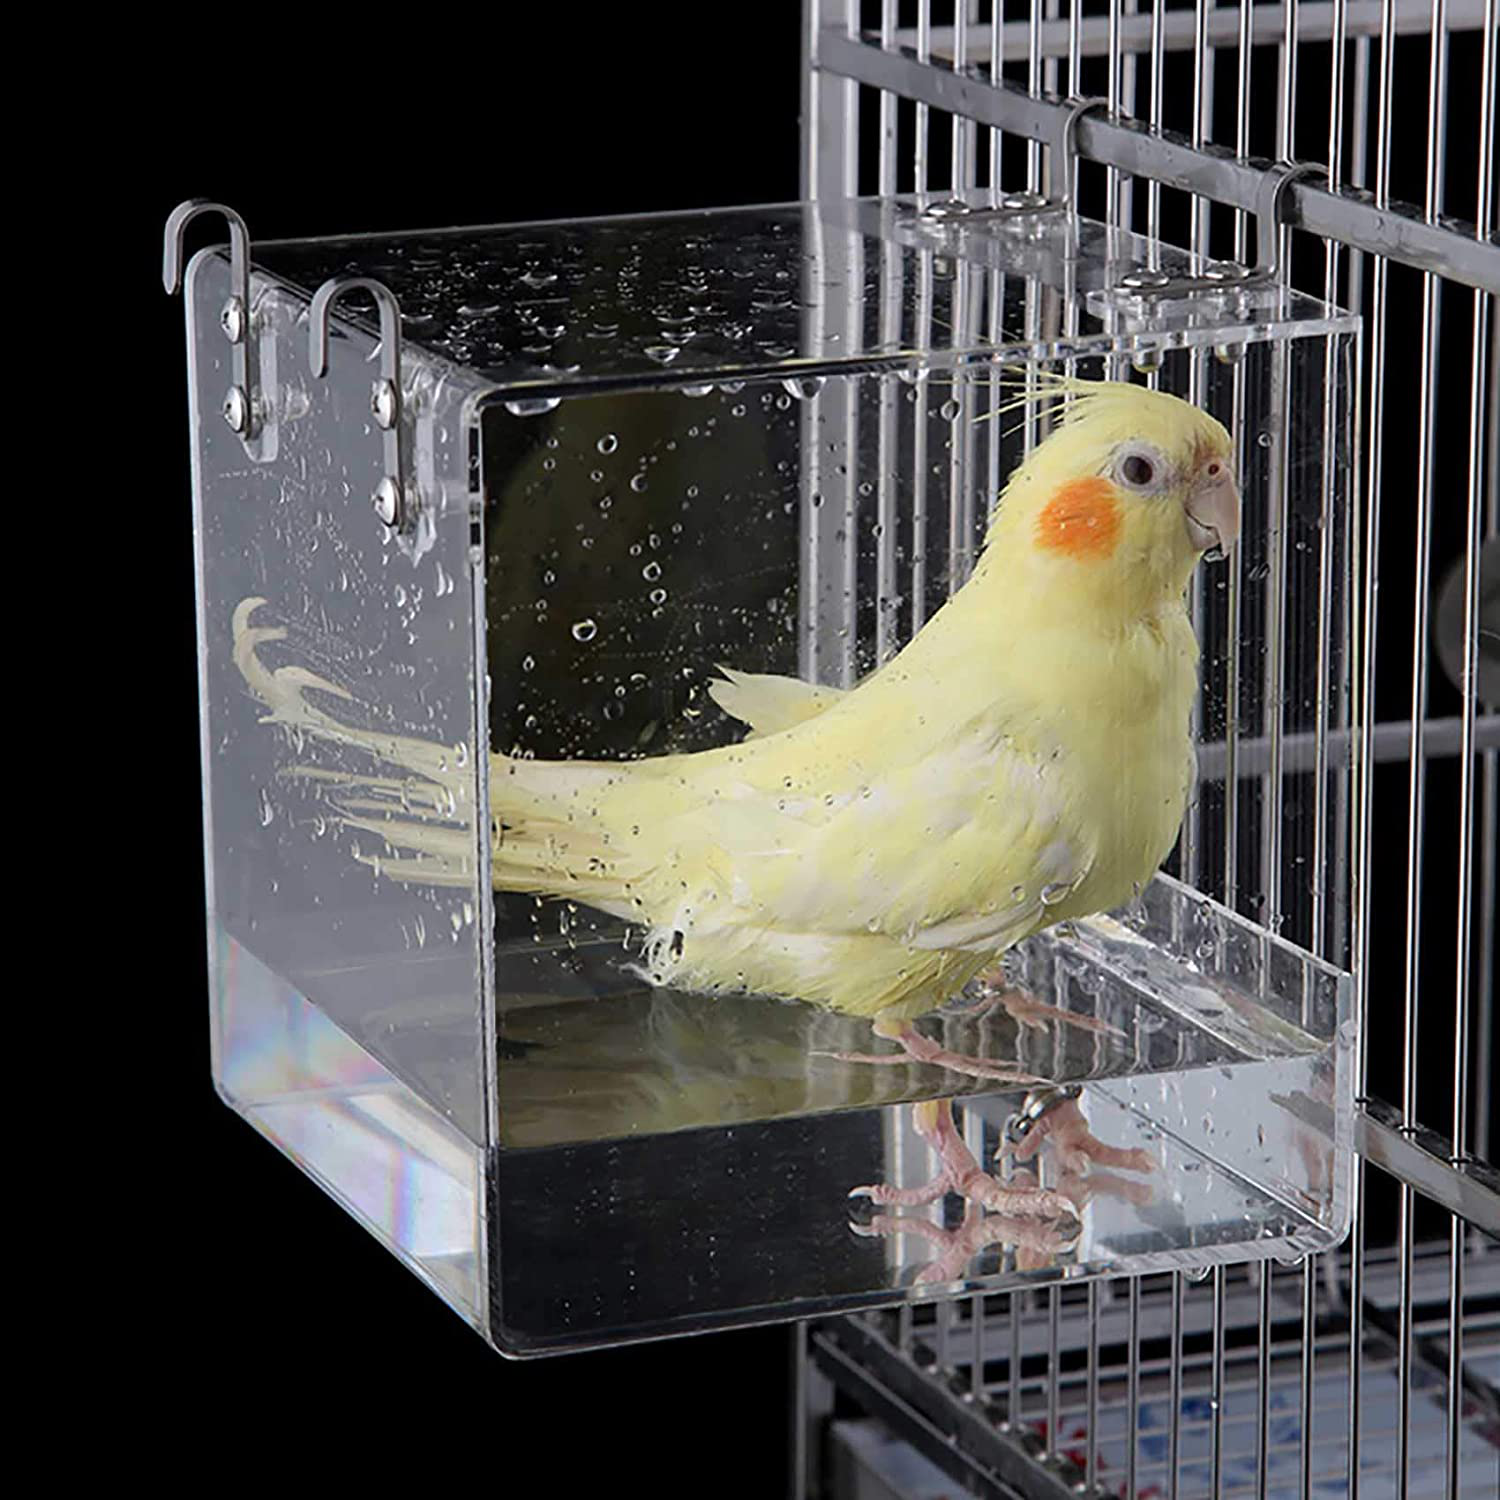 Enoyoo Bird Bath Cage, Cleaning Pet Supplies Cockatiel Bird Bathtub with Hanging Hooks for Little Bird Parrots Spacious Parakeets Portable Shower for Most Birdcage Animals & Pet Supplies > Pet Supplies > Bird Supplies > Bird Cage Accessories EnoYoo   